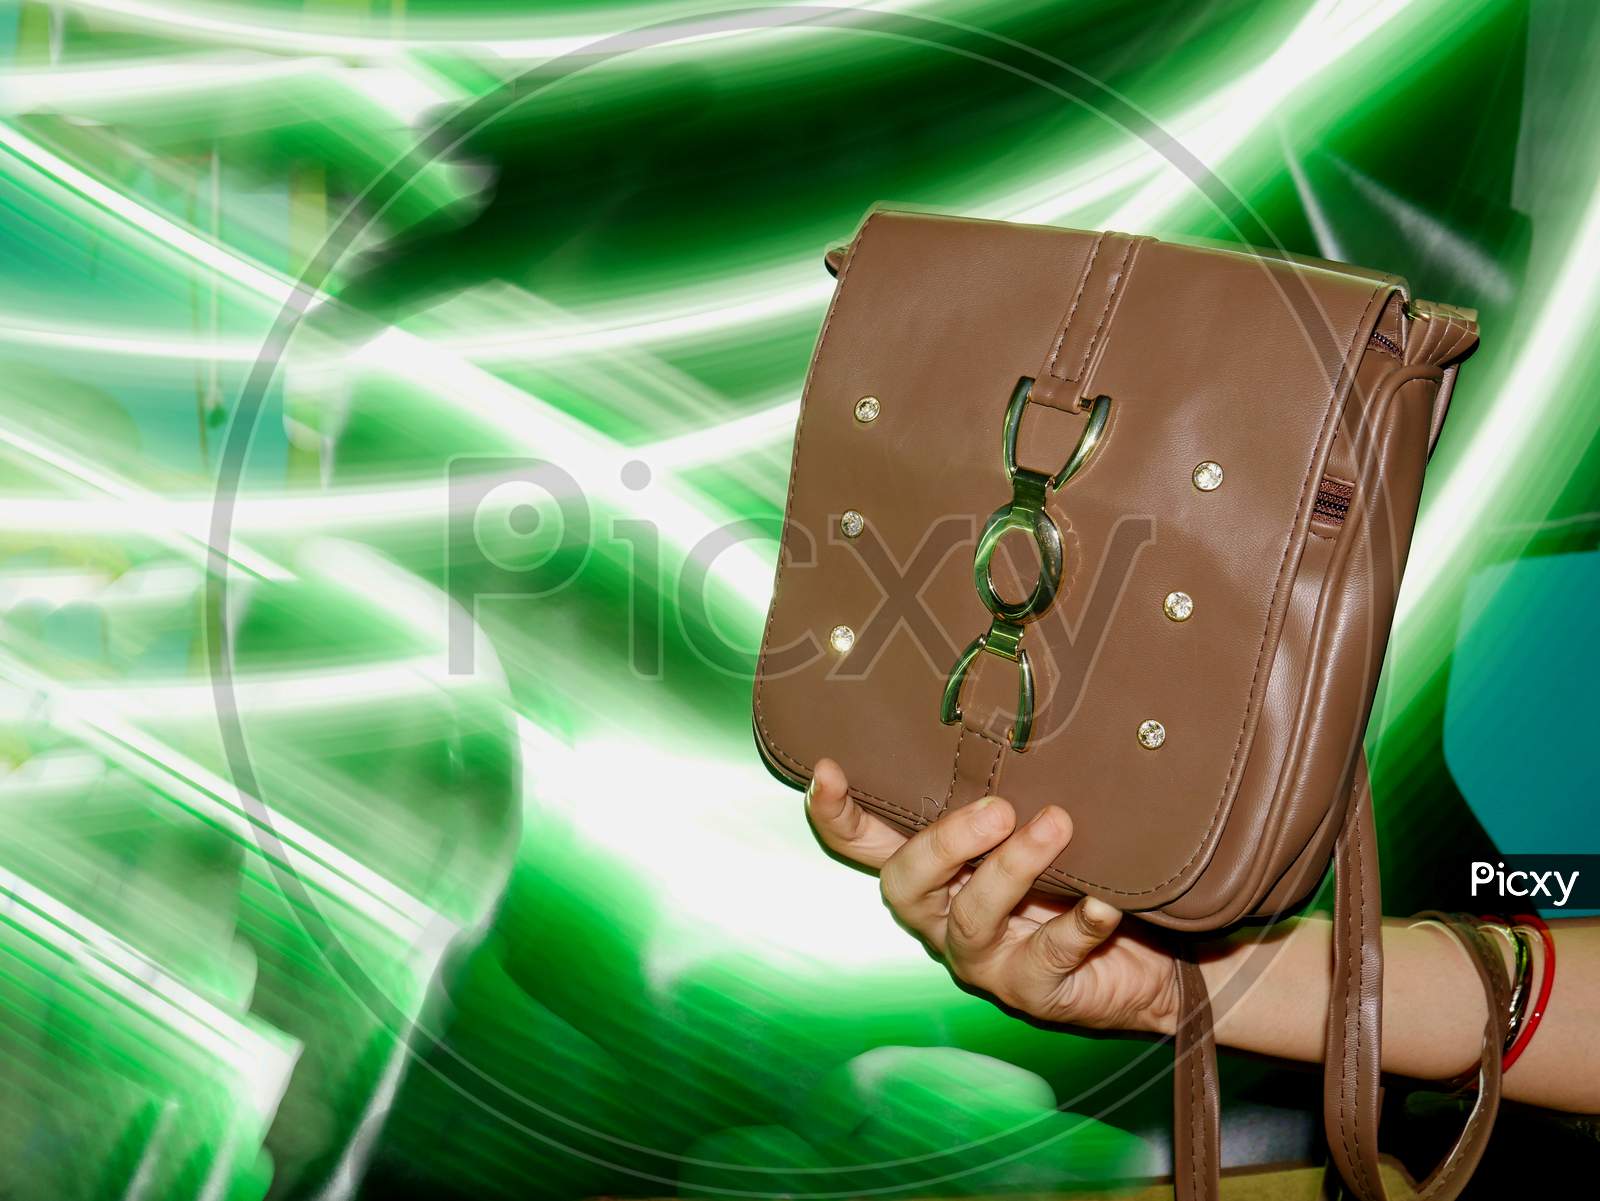 Woman Bag Presented On Girl Hand With Light Effect Shine Backdrop, Commercial Product Presentation Image.